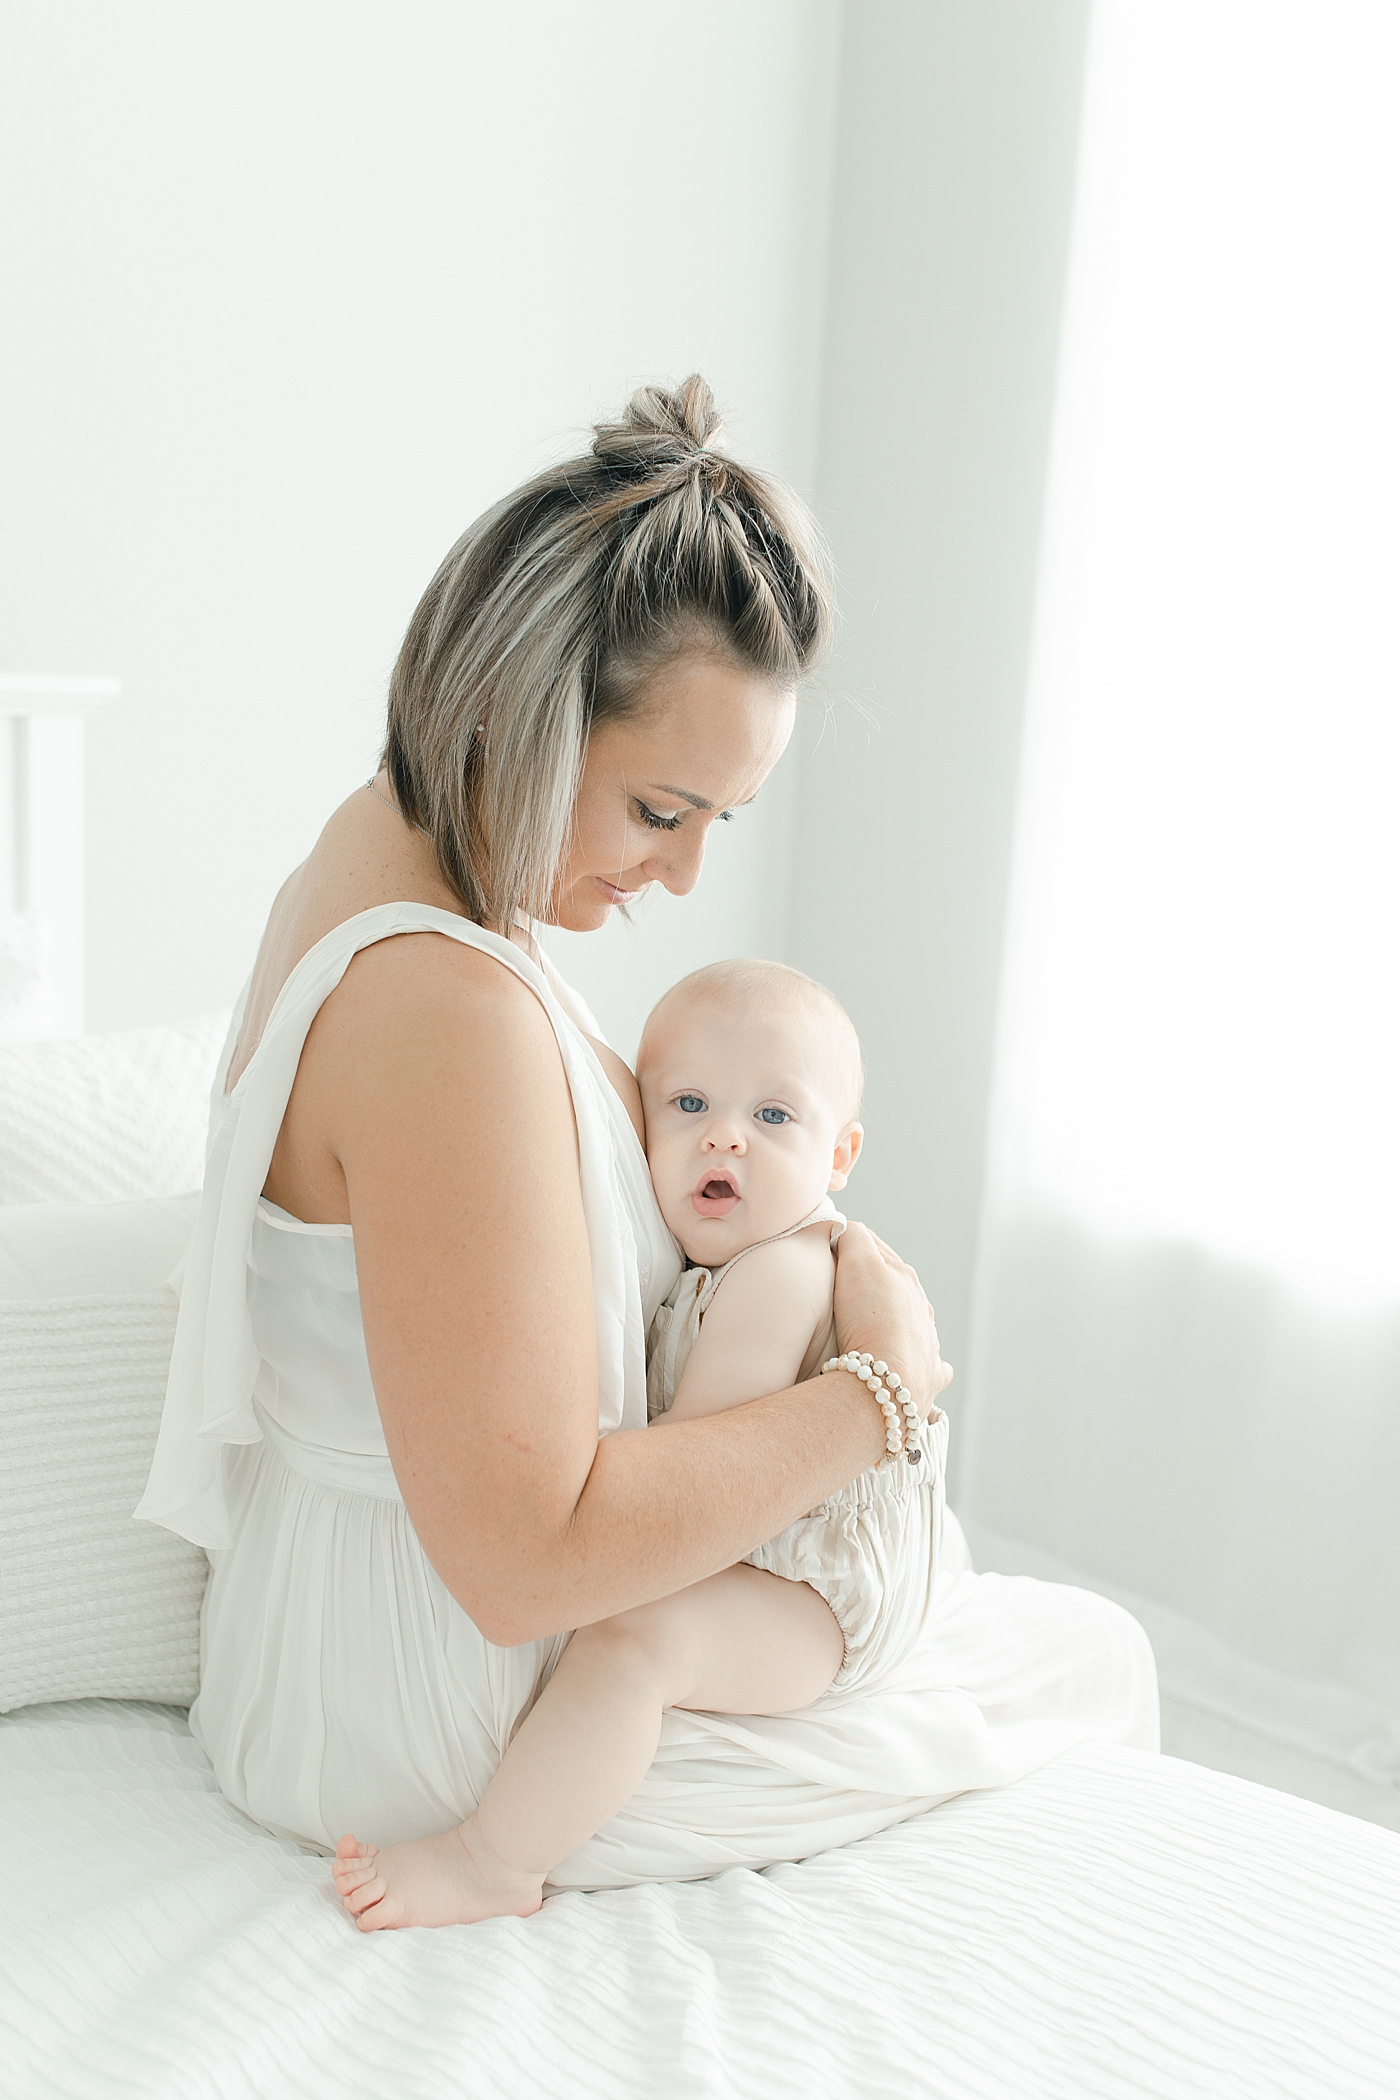 Mom sitting on a bed holding her baby boy | Photo by Little Sunshine Photography